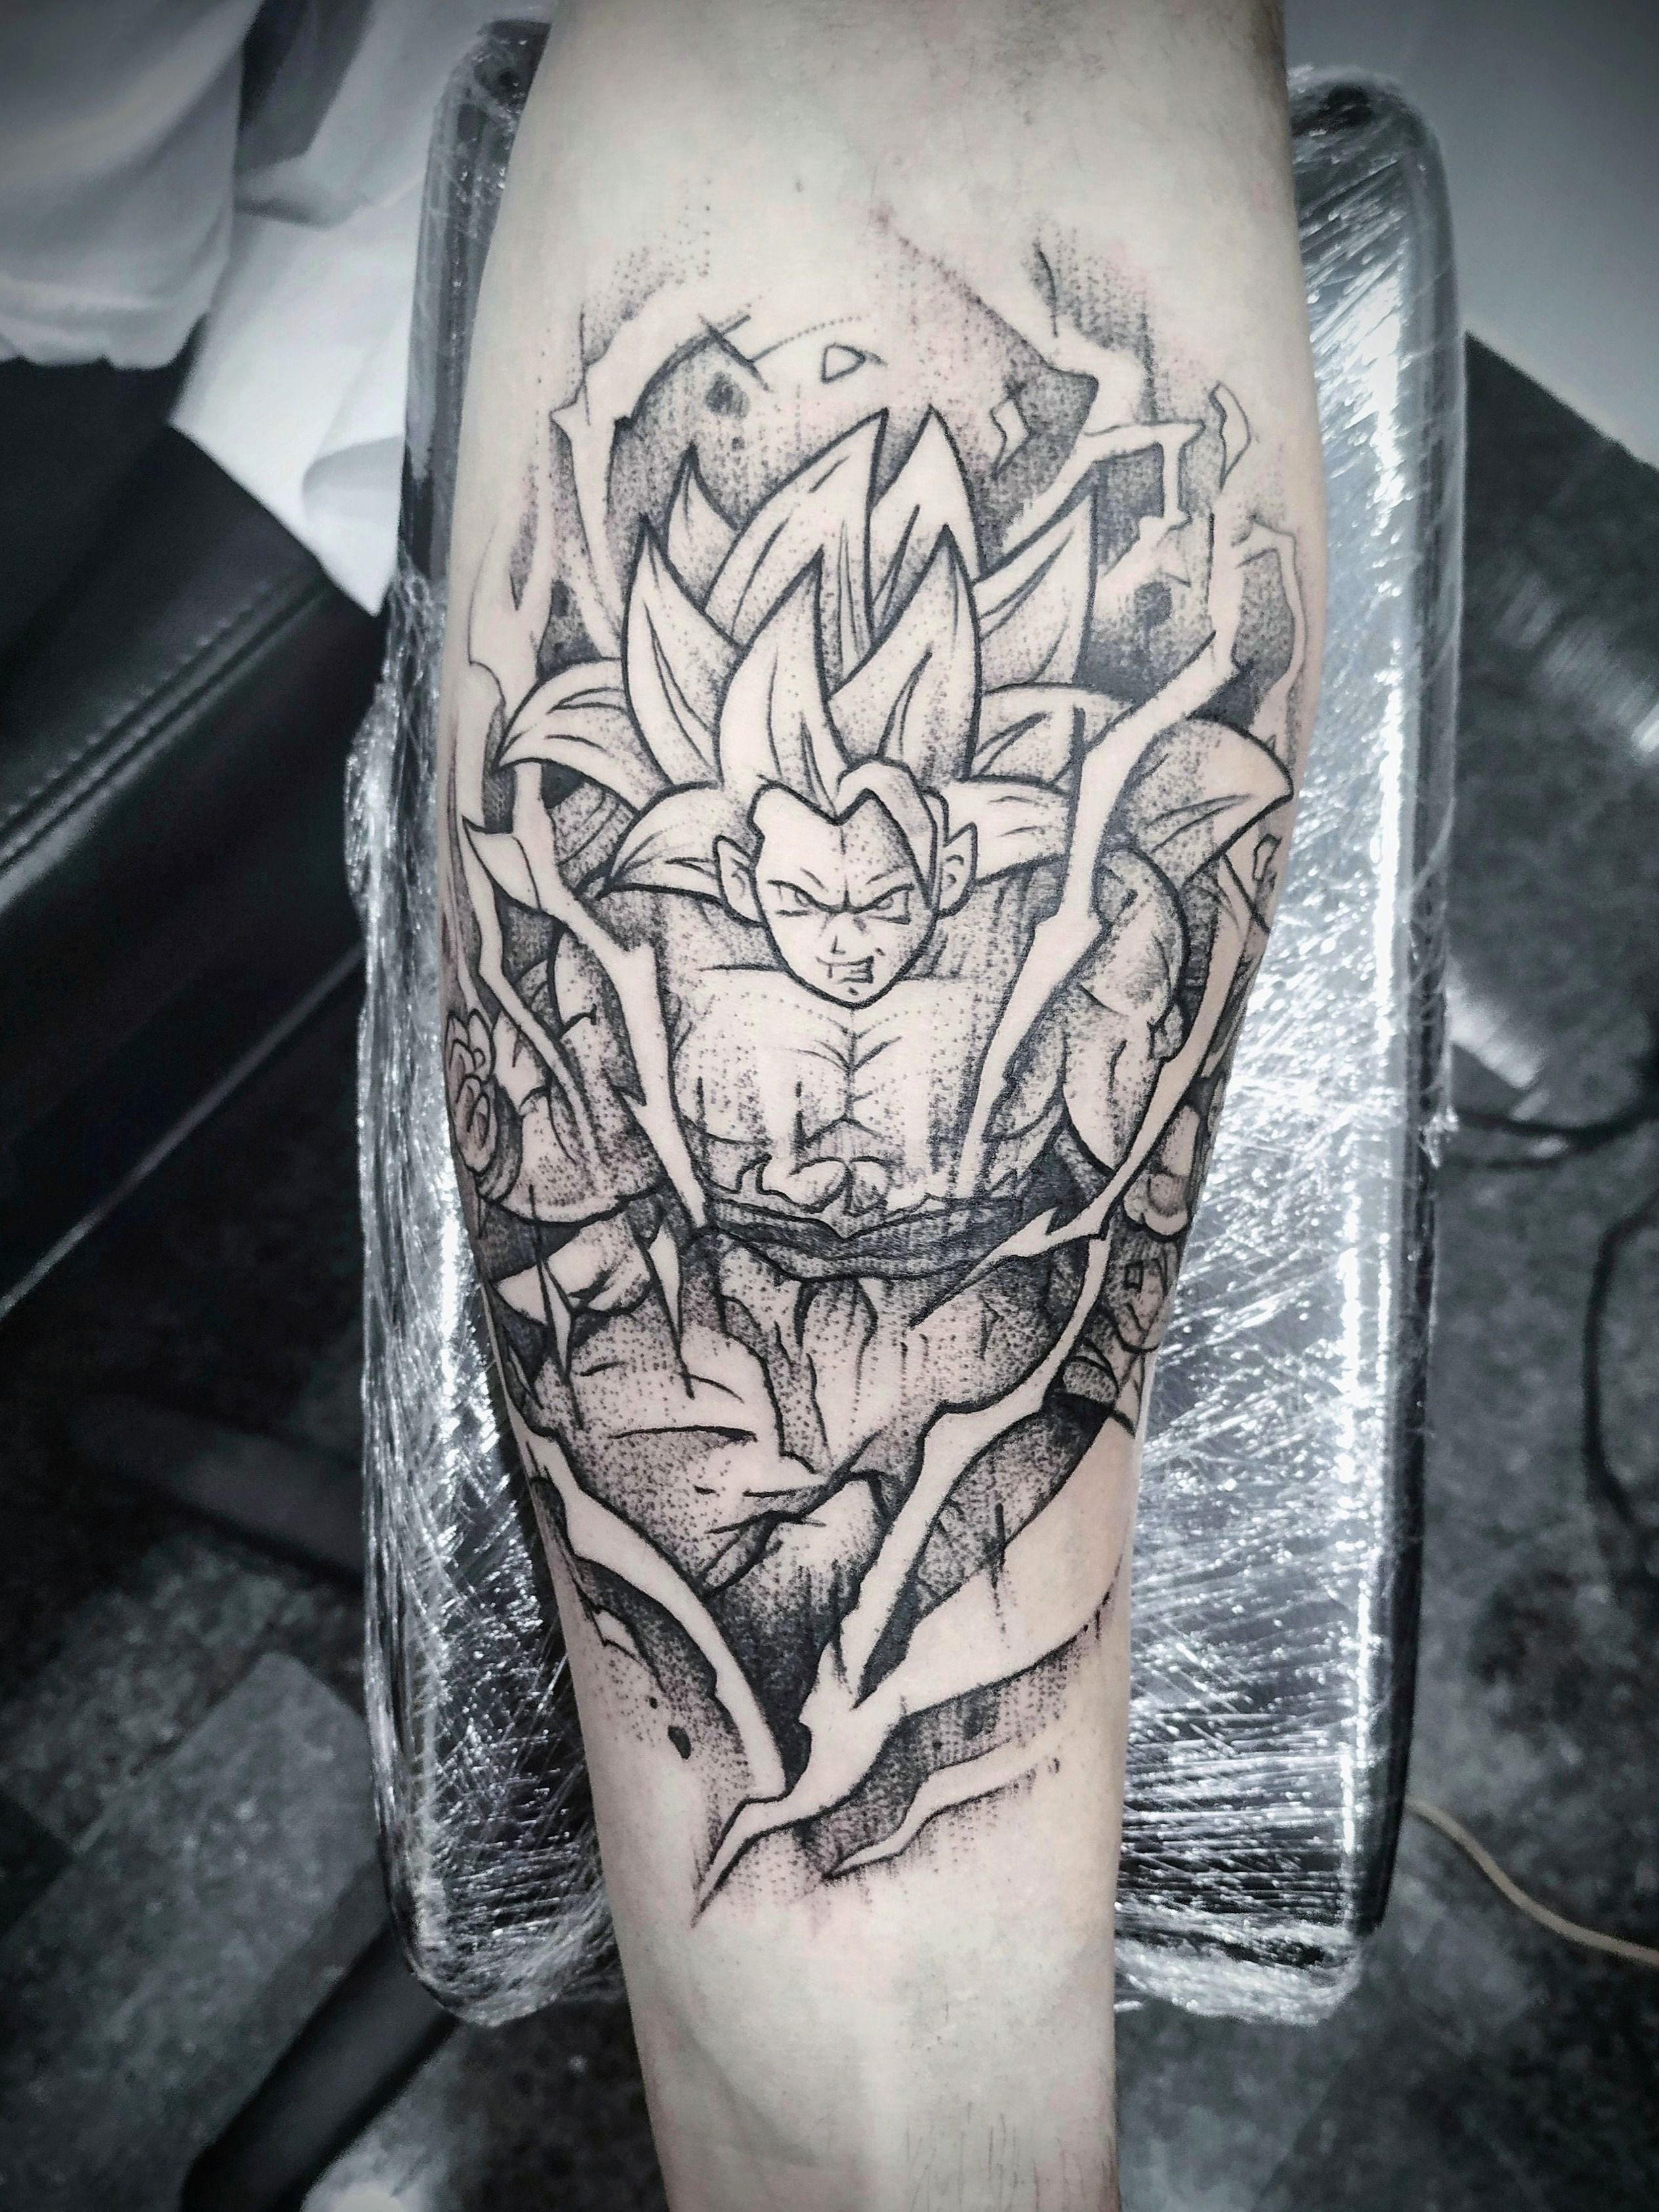 The Top 20 League of Legends Tattoo Ideas  2021 Inspiration Guide